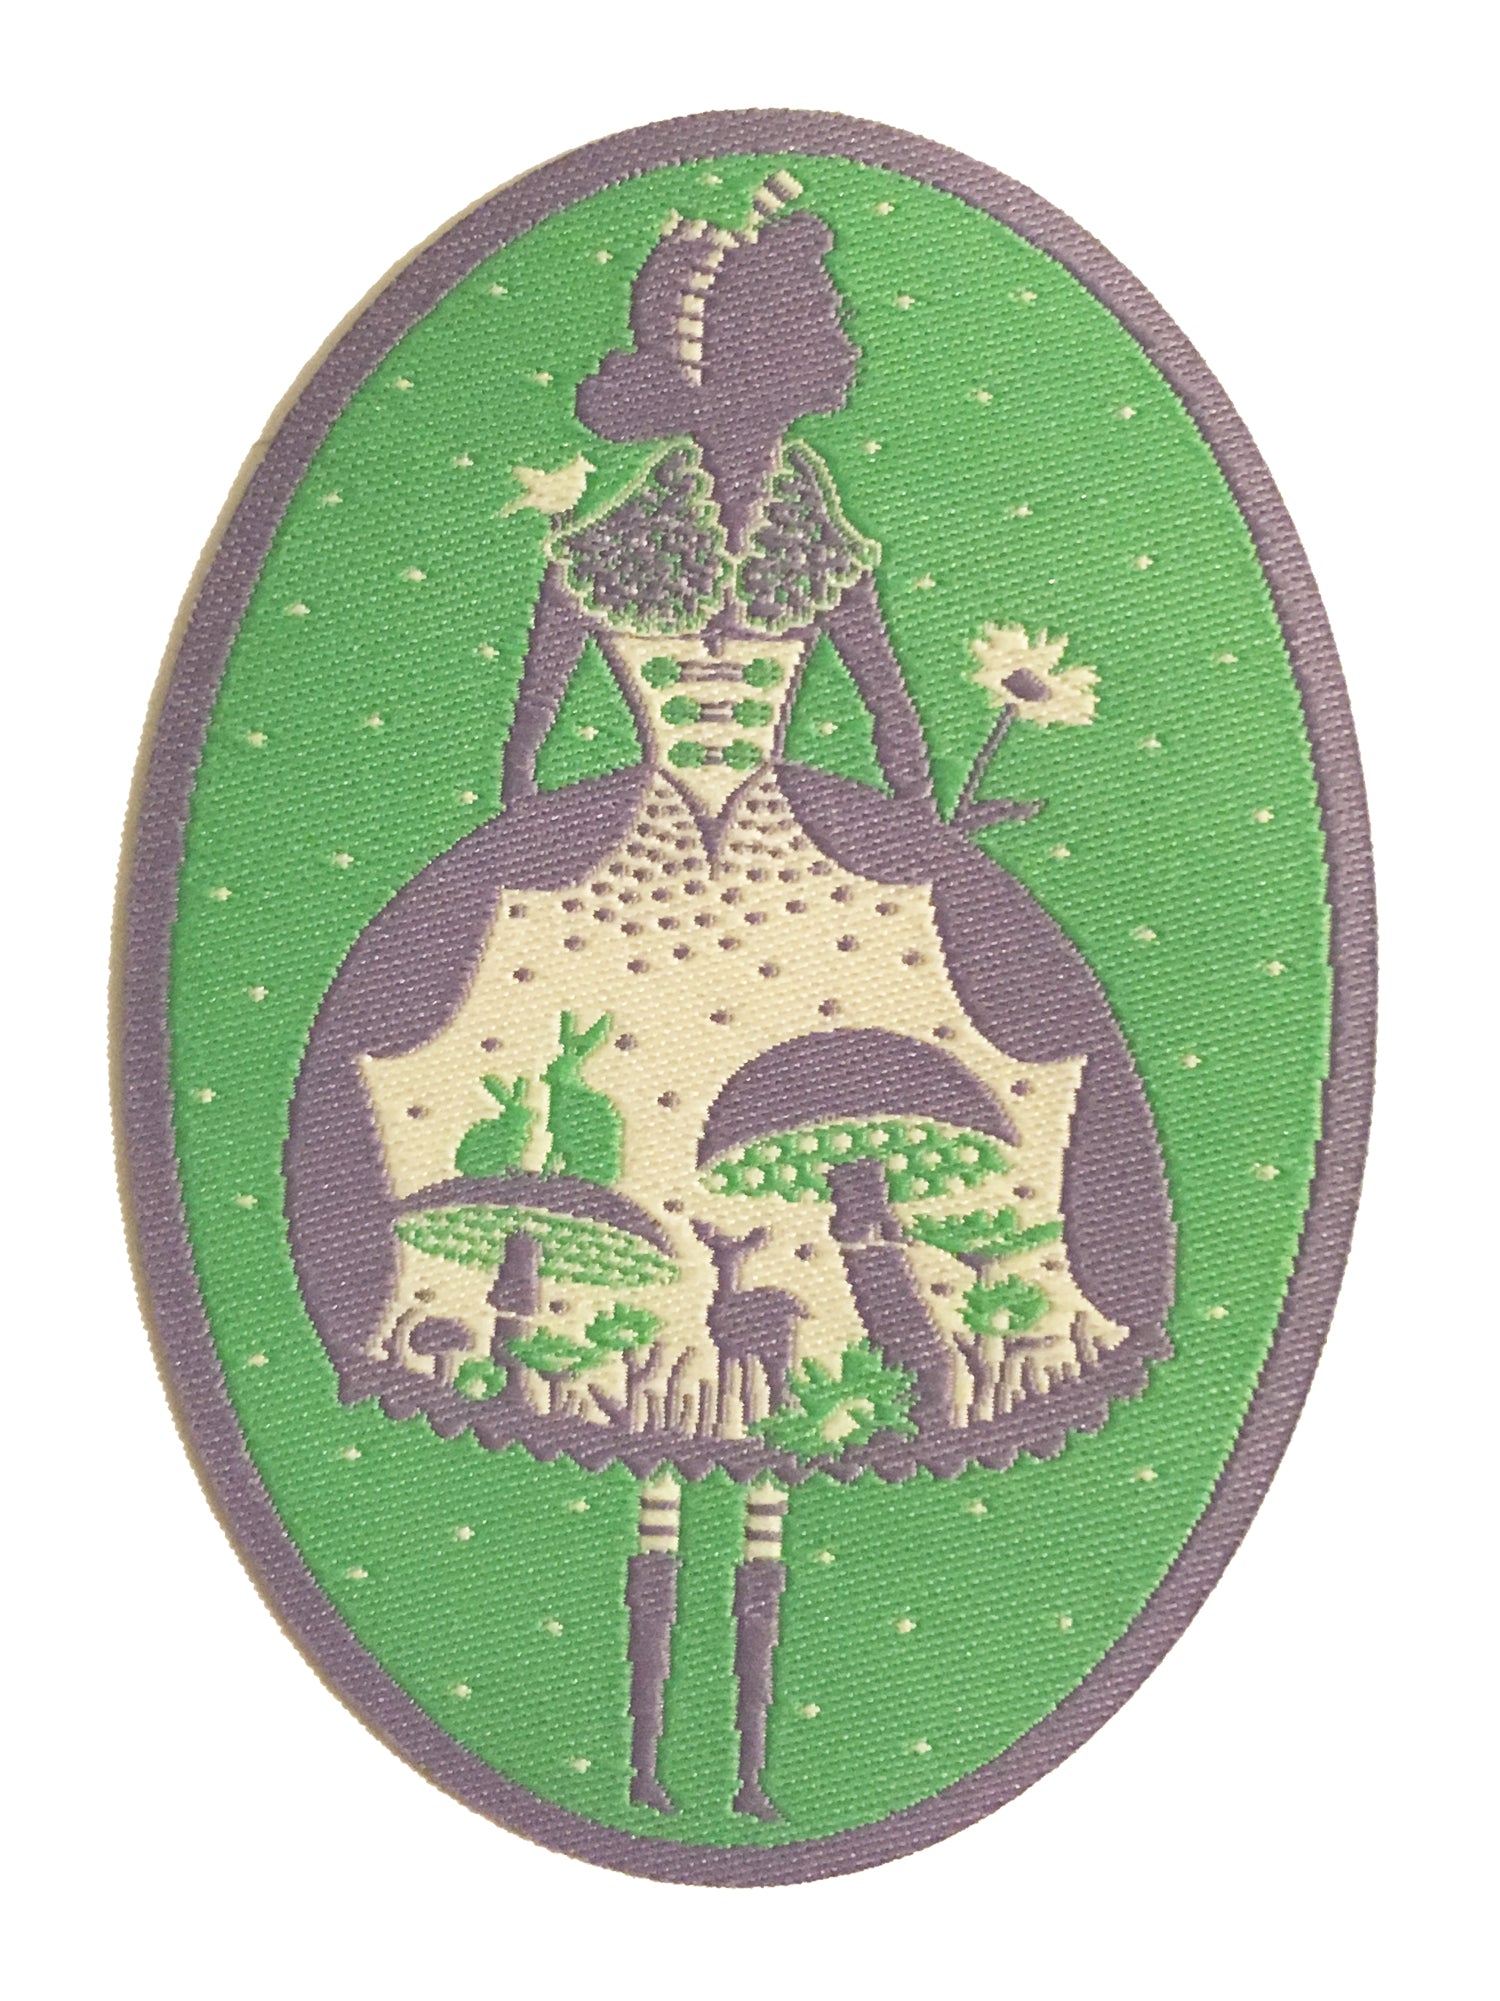 Light green, grey and white Alice patch with deer, mushrooms and bunnies